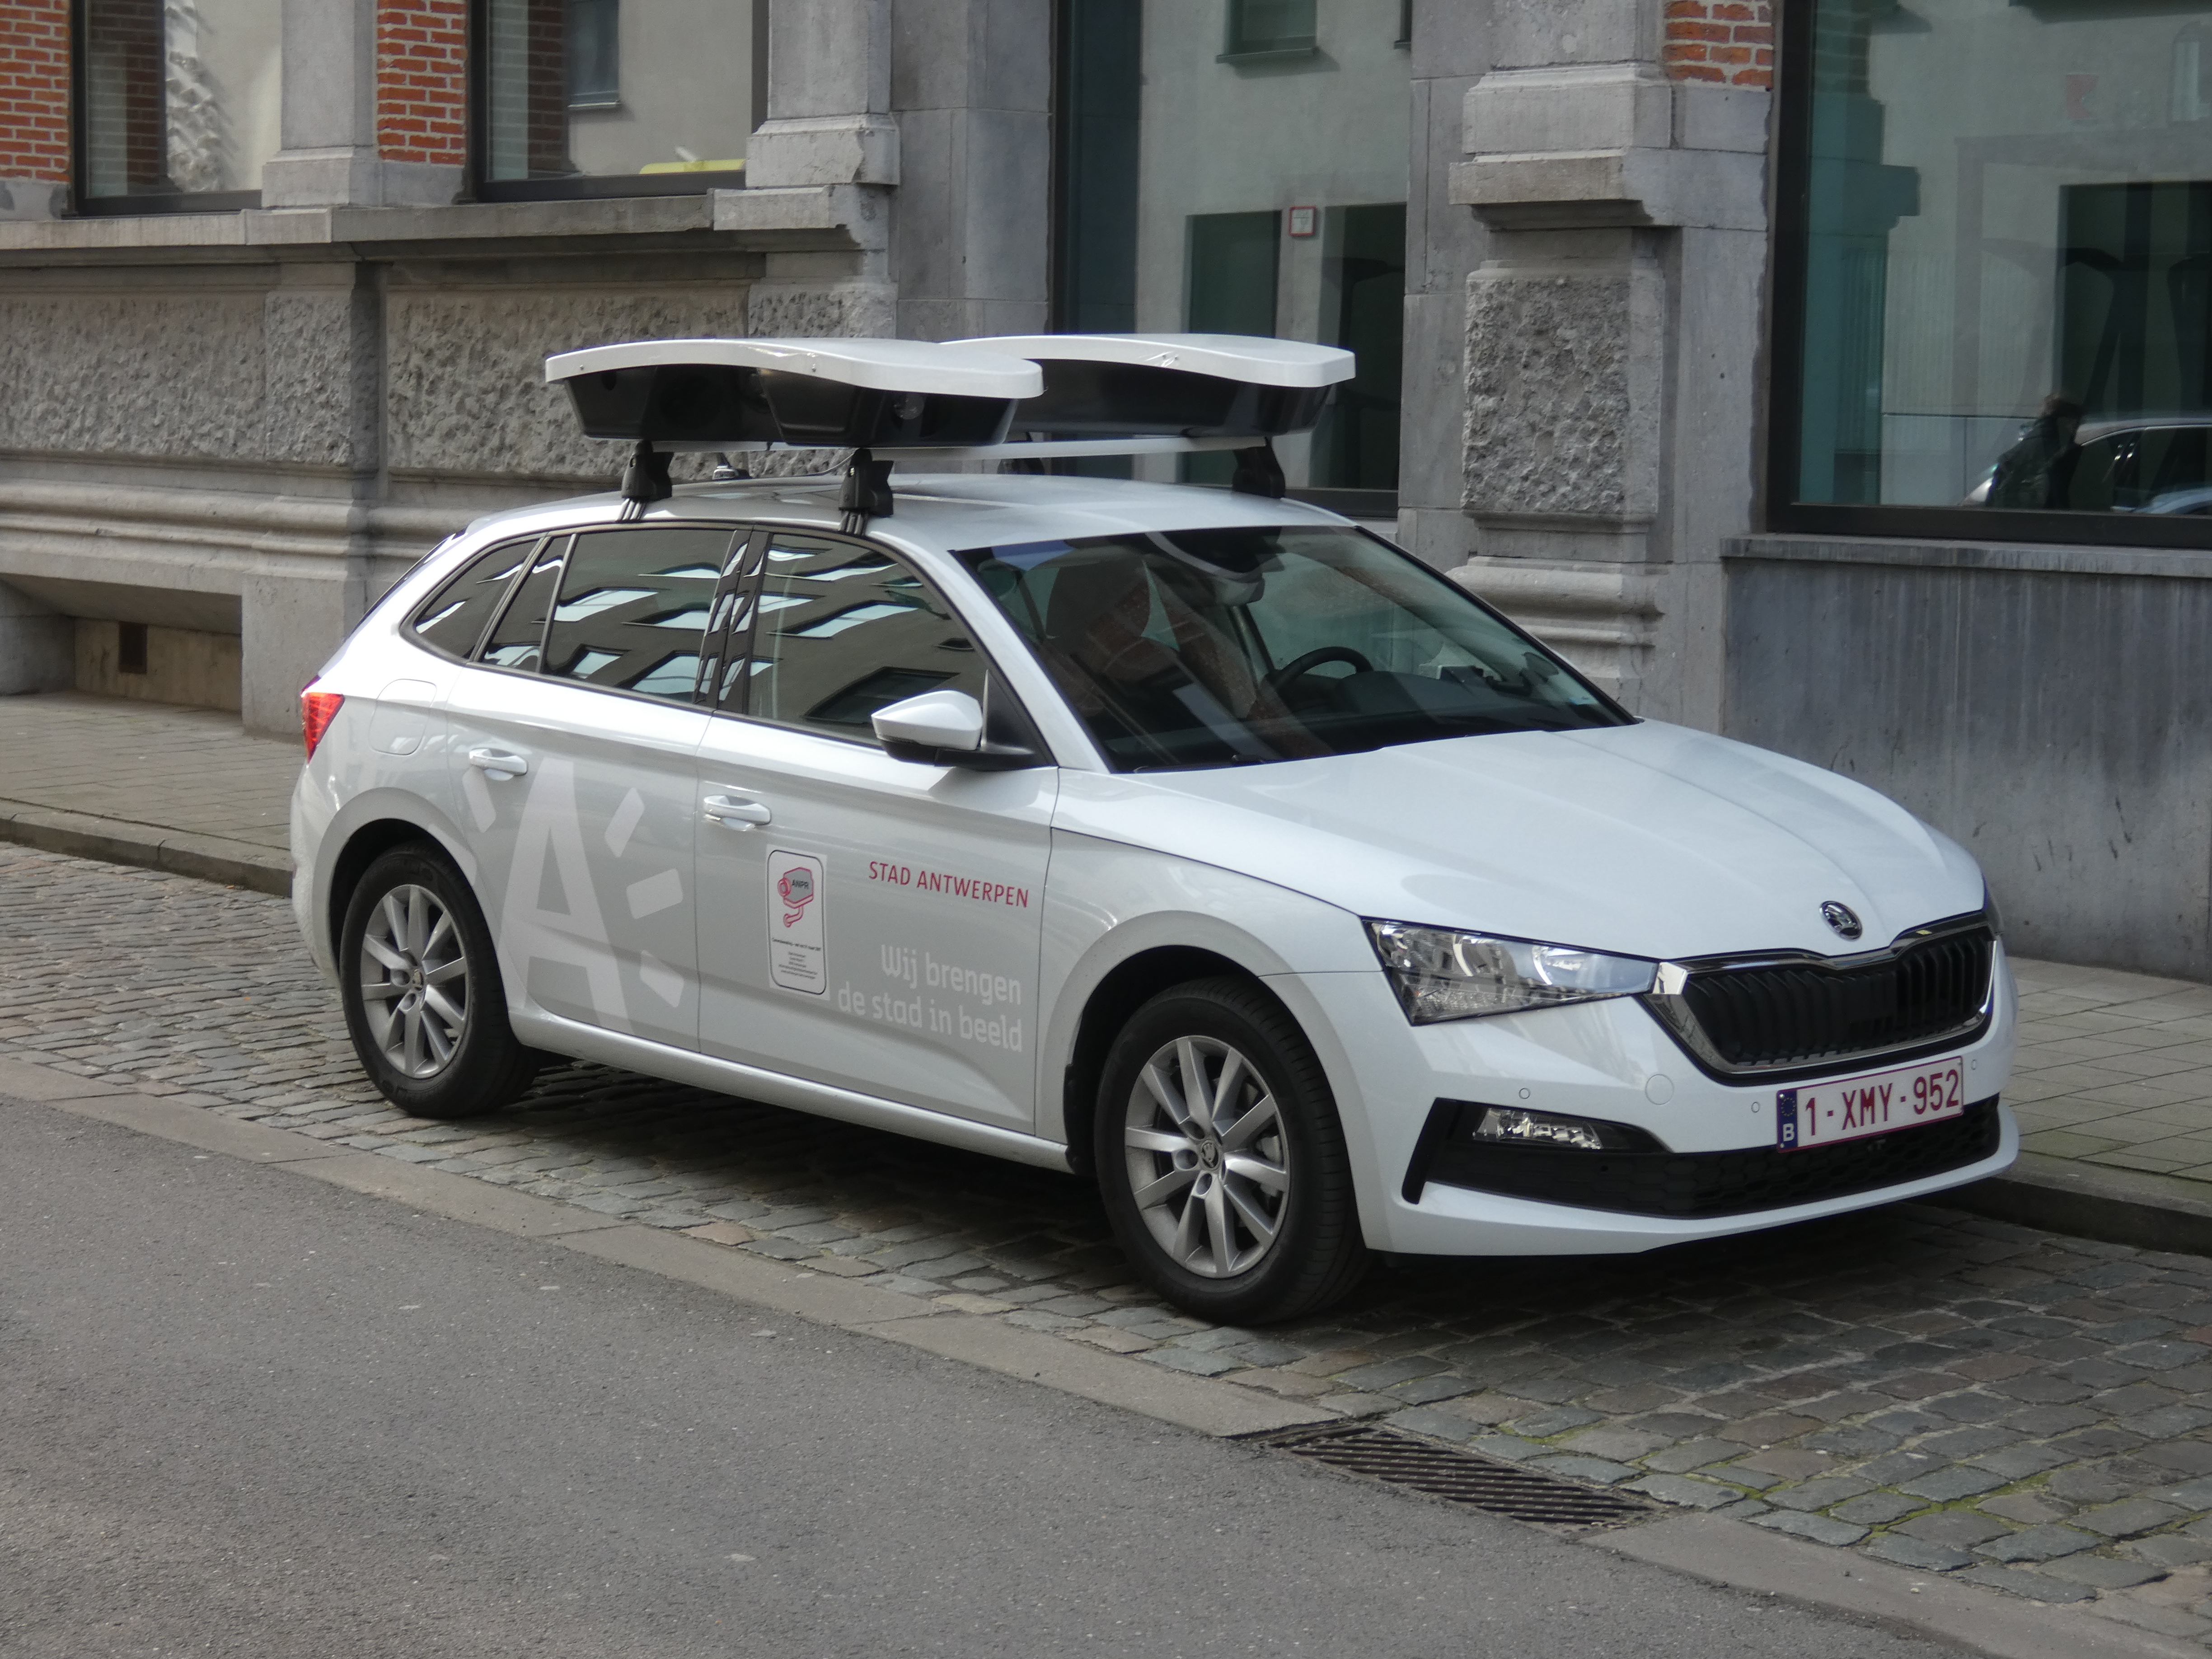 Antwerp tests scan-car to check parking violations